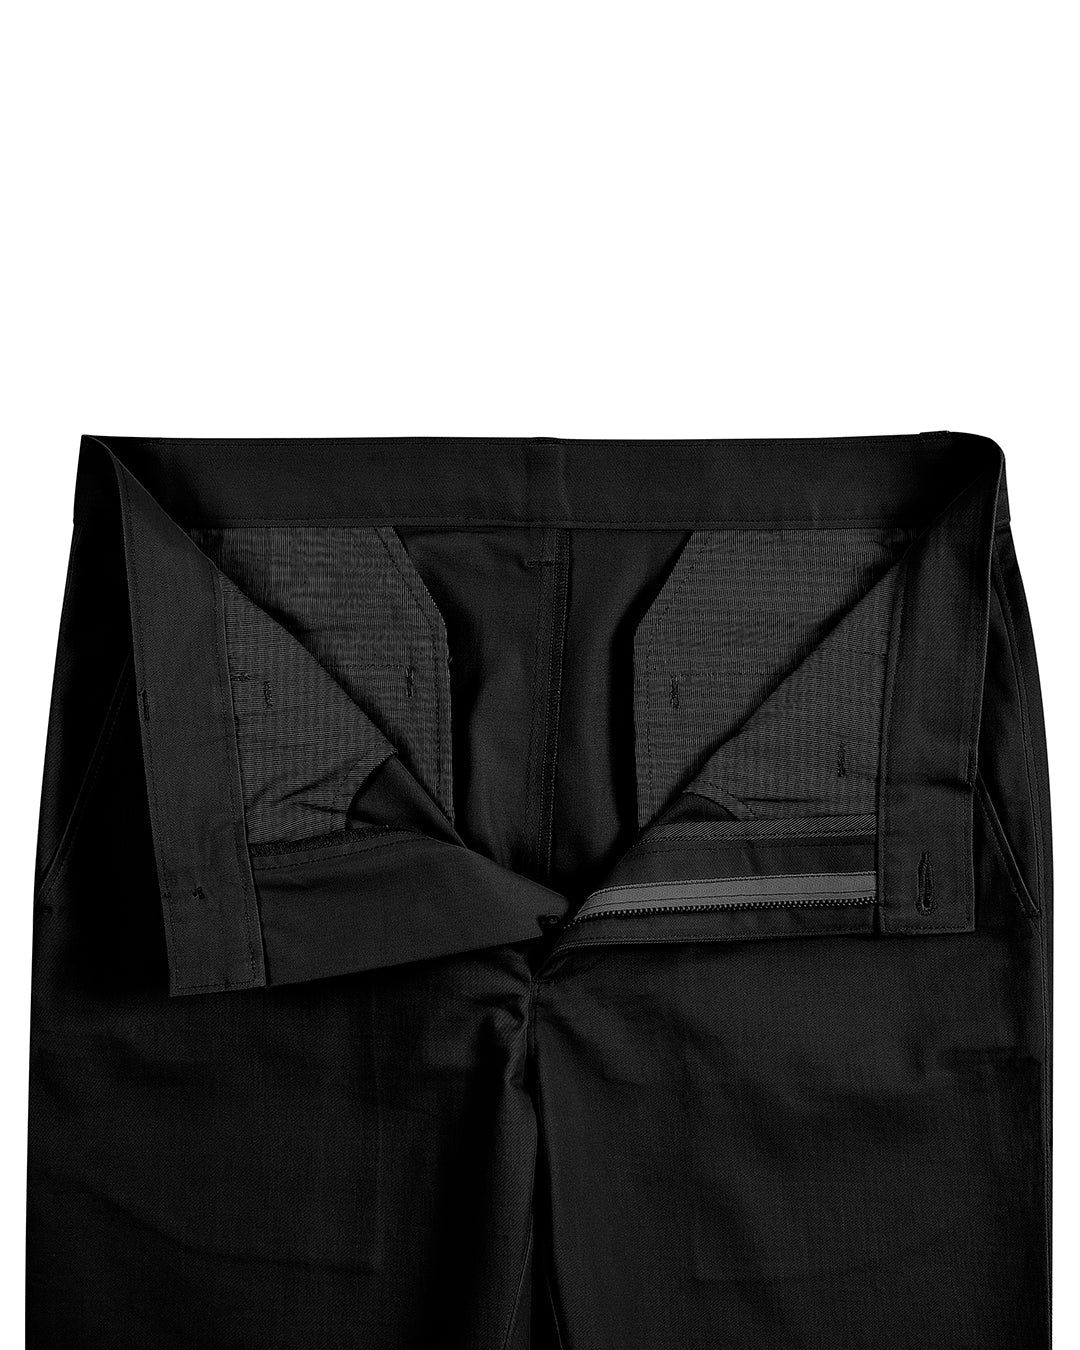 Front open view of custom Genoa Chino pants for men by Luxire in black